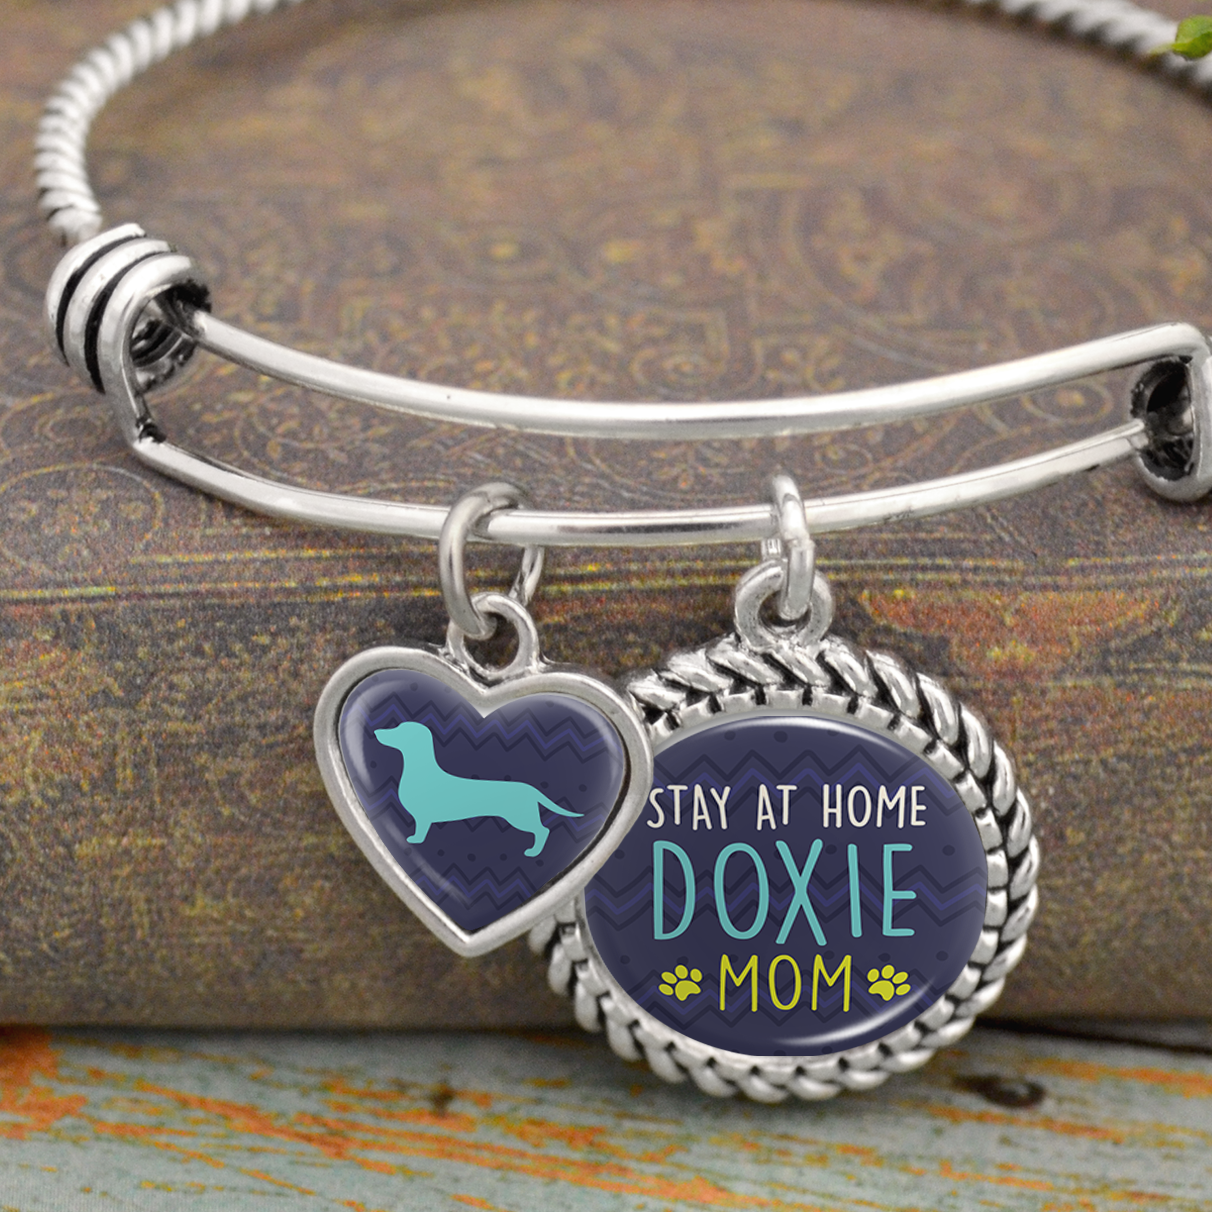 Stay At Home Doxie Mom Charm Bracelet